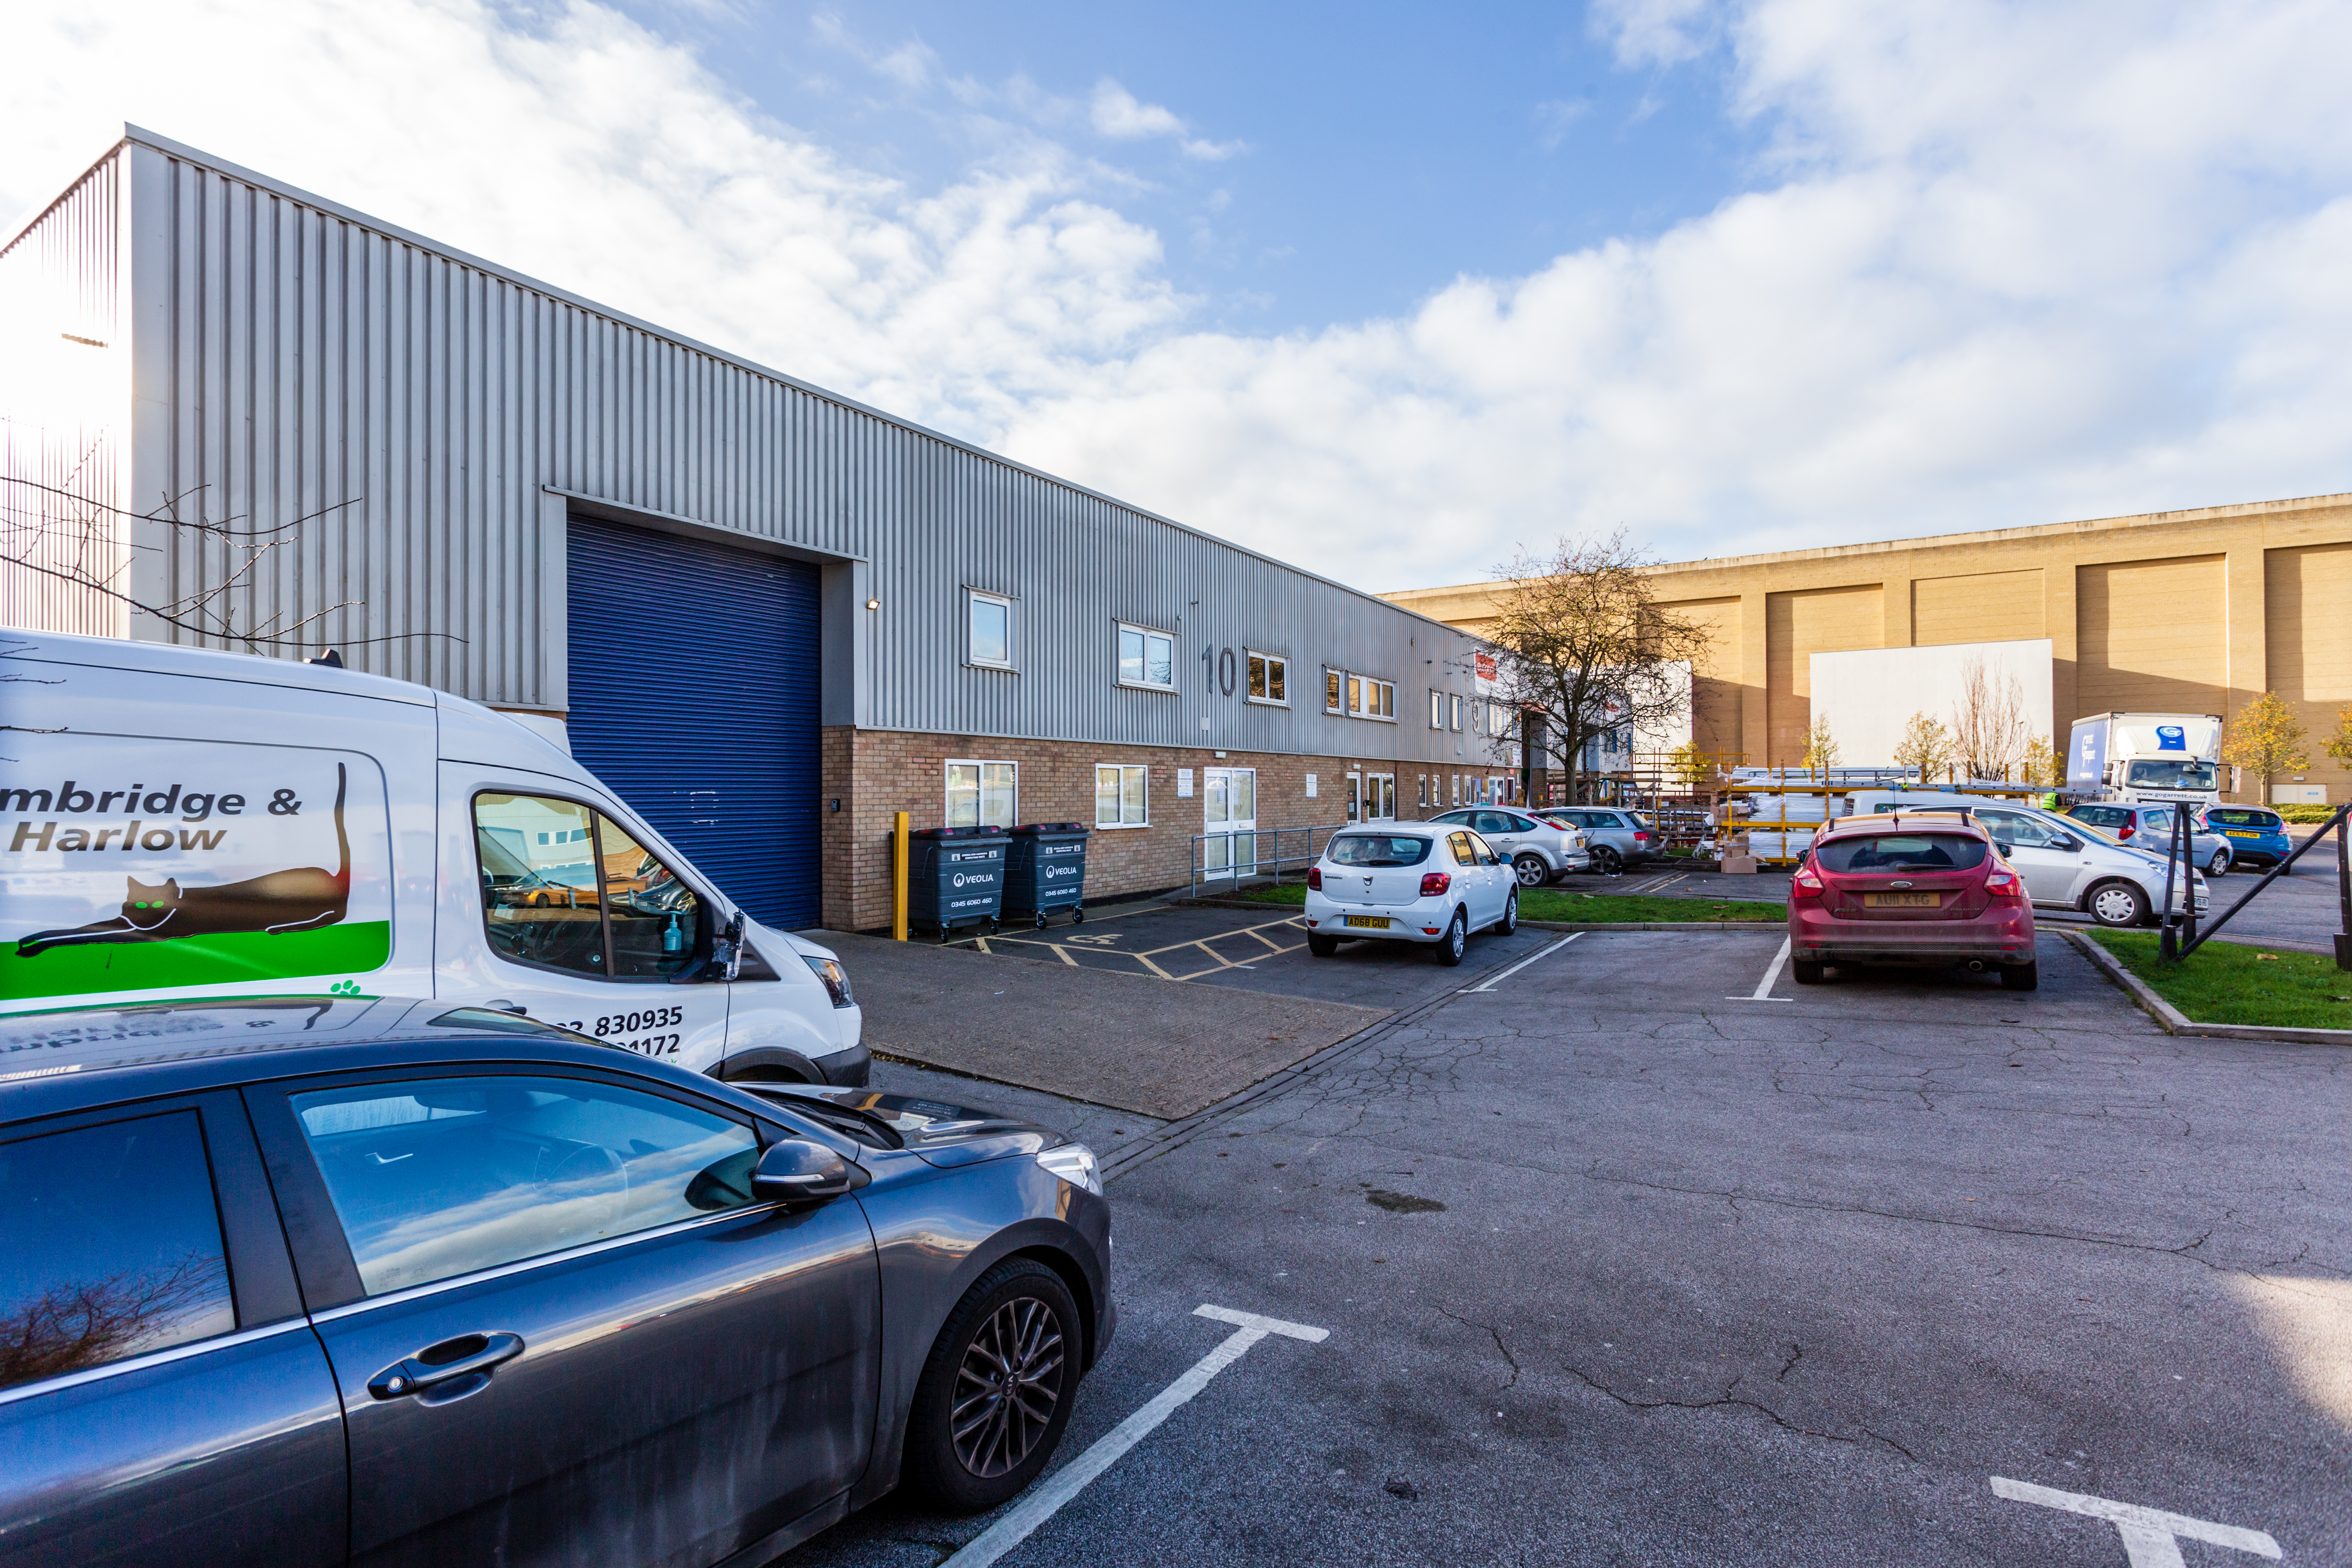 Ongoing occupational agency at the largest multi-let trade and warehouse industrial estate in Cambridge